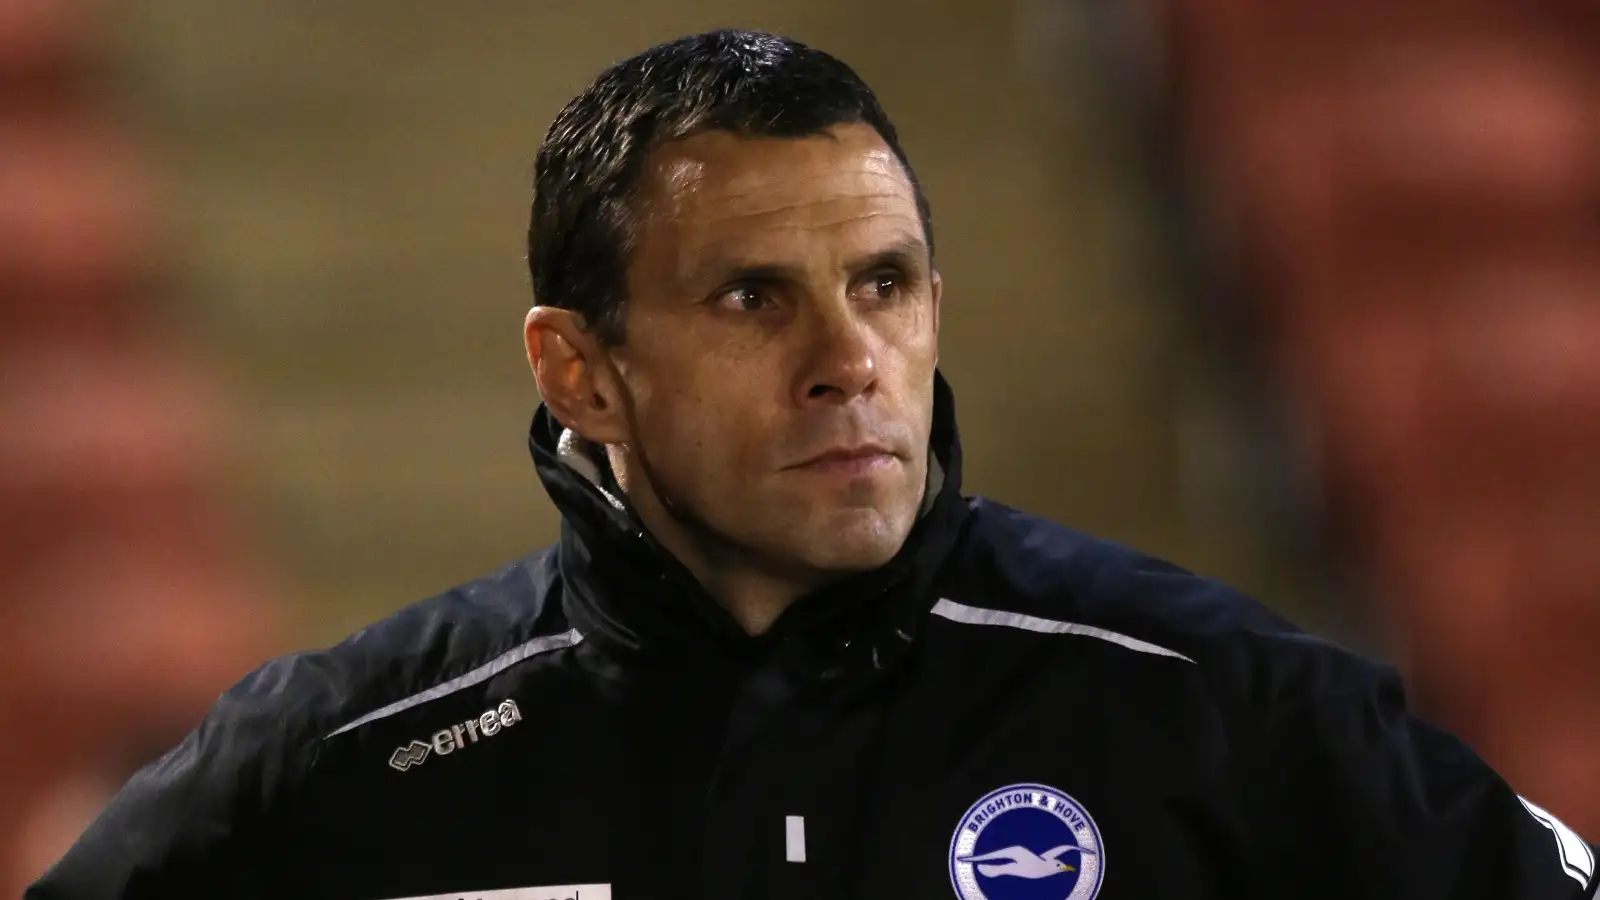 Brighton the most well-run club? Ask the manager they sacked live on TV…